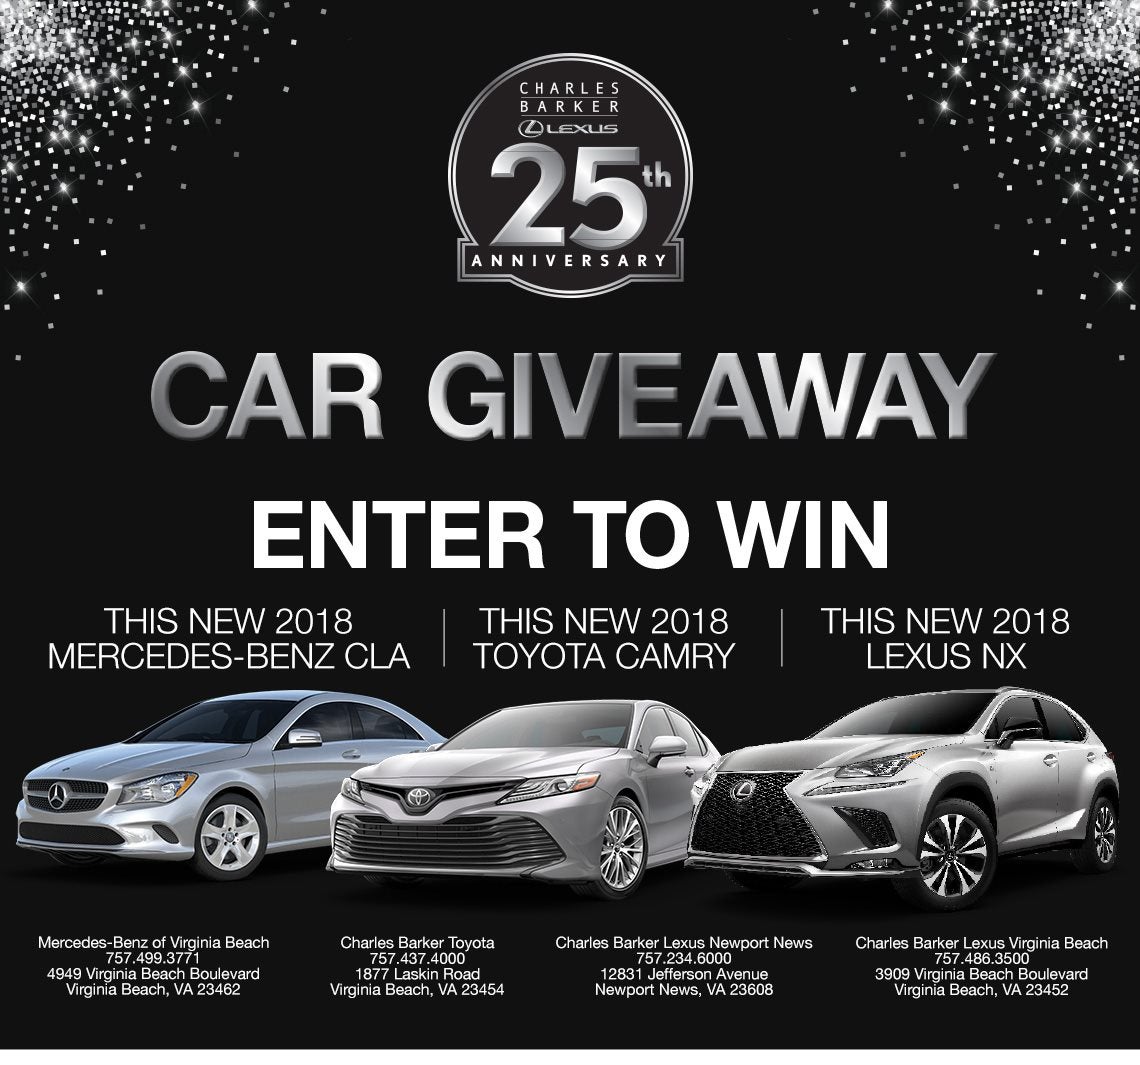 25th Anniversary Car Giveaway - Enter to Win - 2018 Mercedes-Benz CLA or 2018 Toyota Camry or 2018 Lexus NX